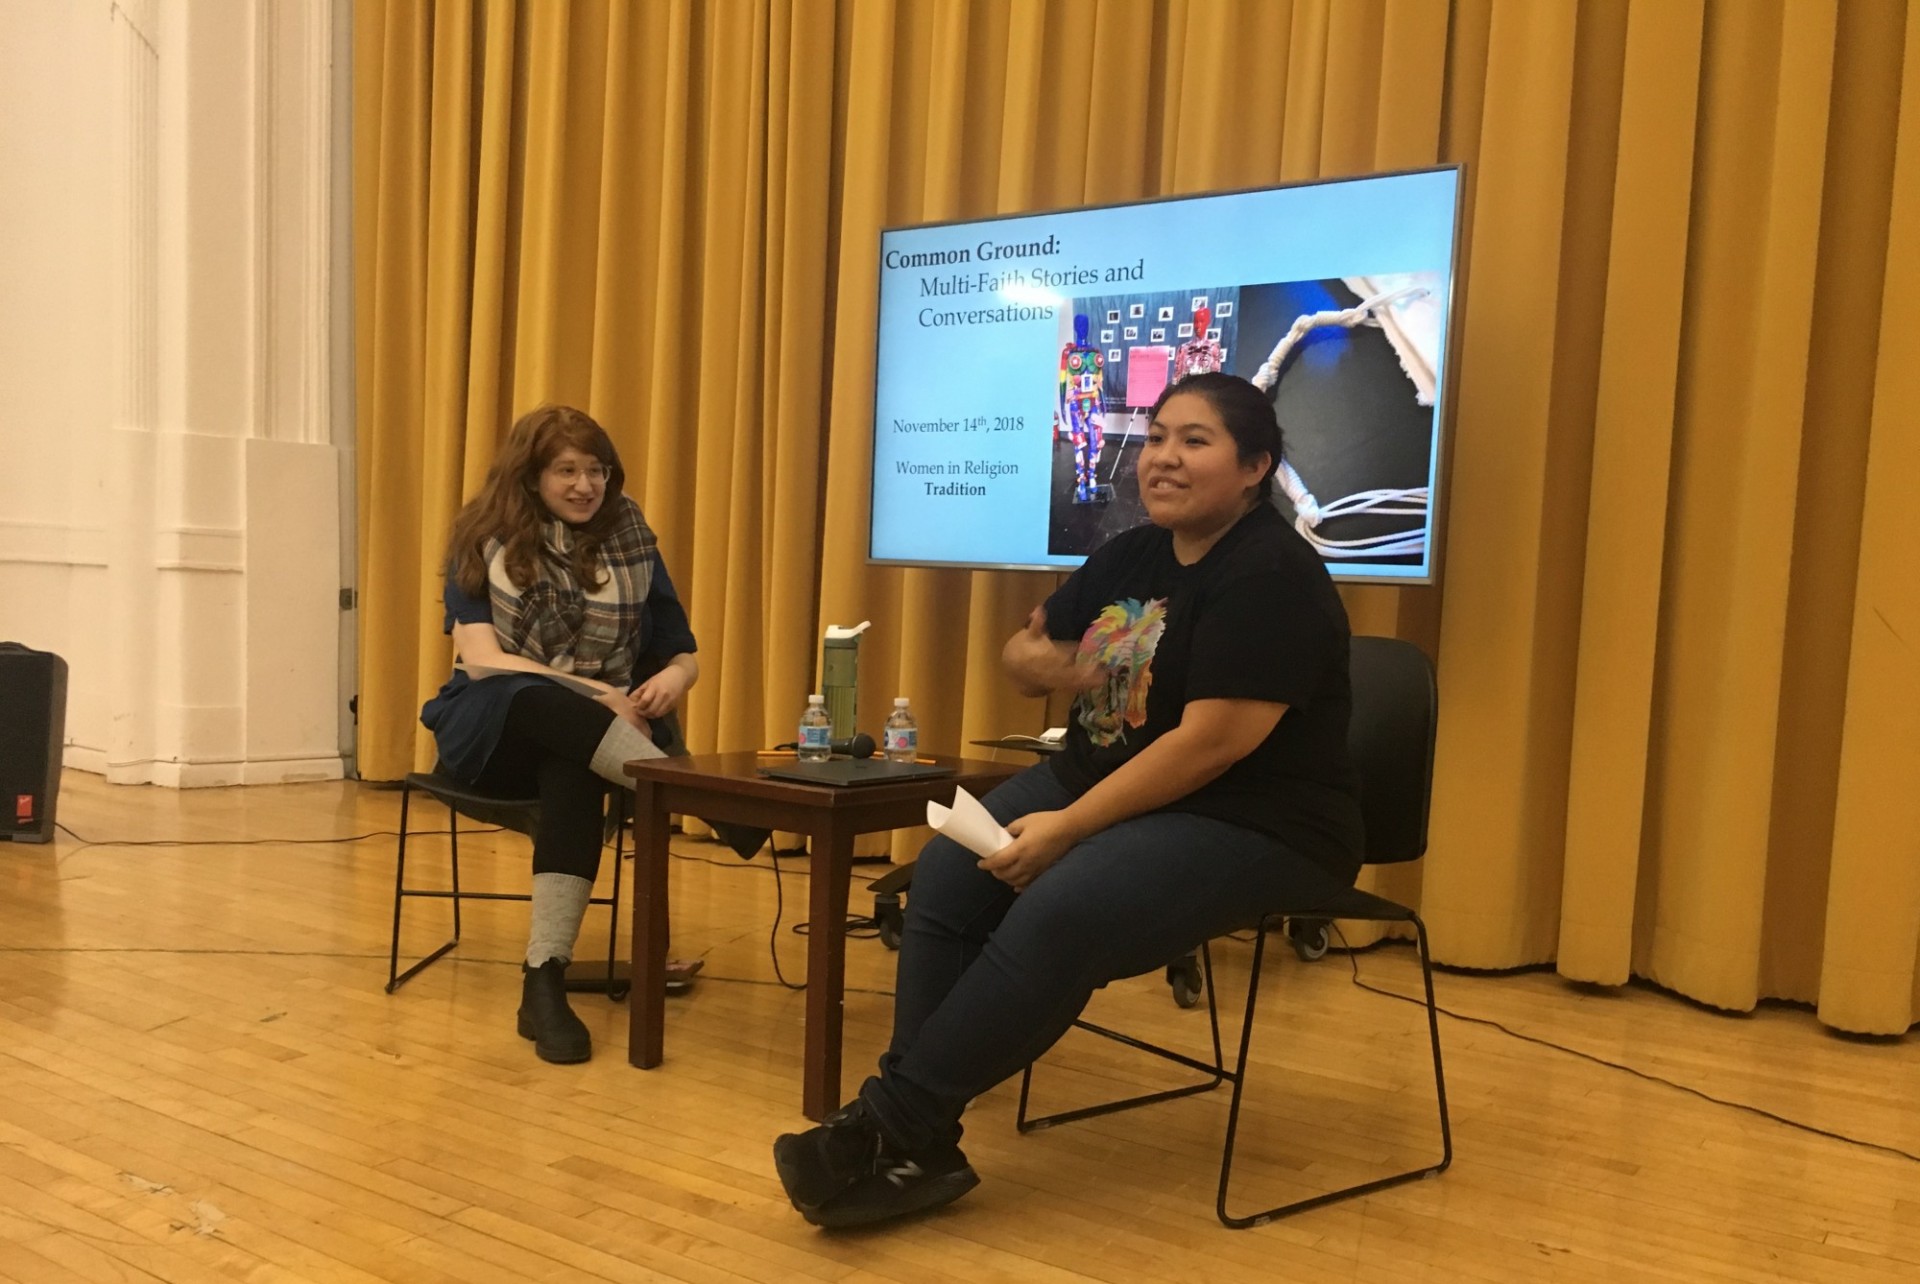 Jessica Tezen and Atara Cohen speaking at a Common Ground Event in the Earl Hall Auditorium in front of the mustard curtain.